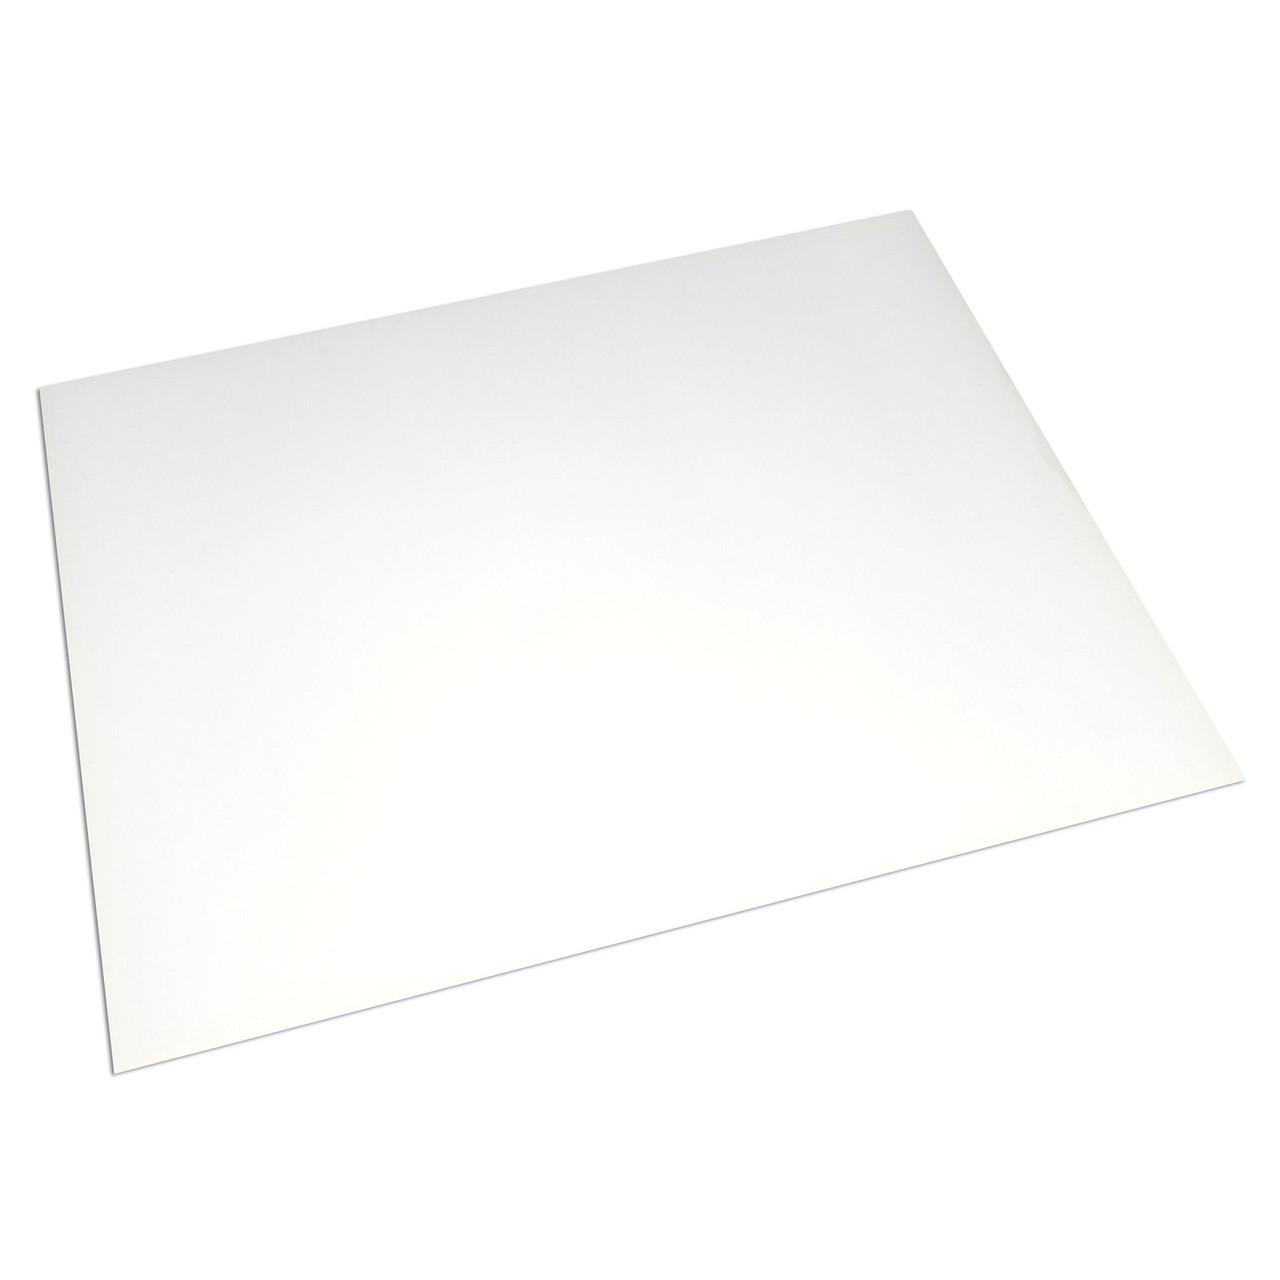 Poster Board, White 10pt., 14 x 22, 100 Sheets  PACCAR93736 69.88 New